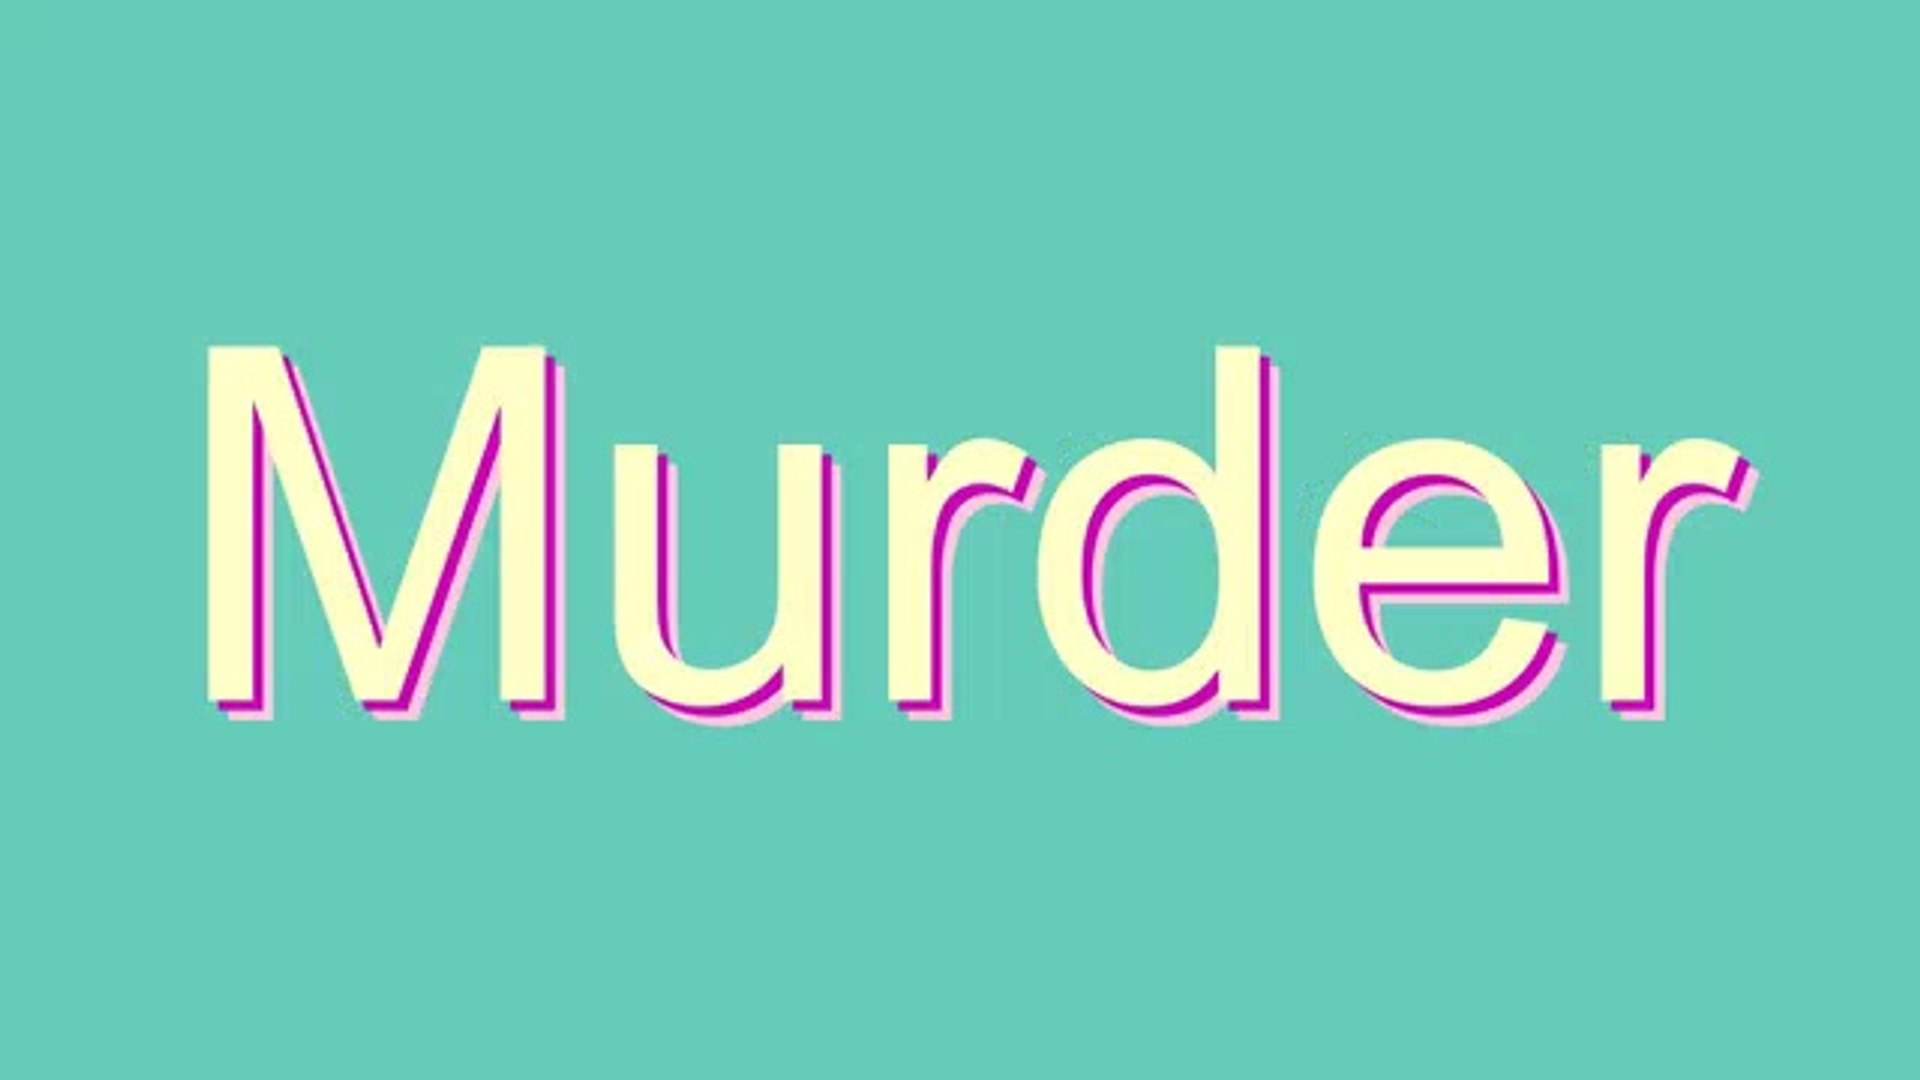 How to Pronounce Murder